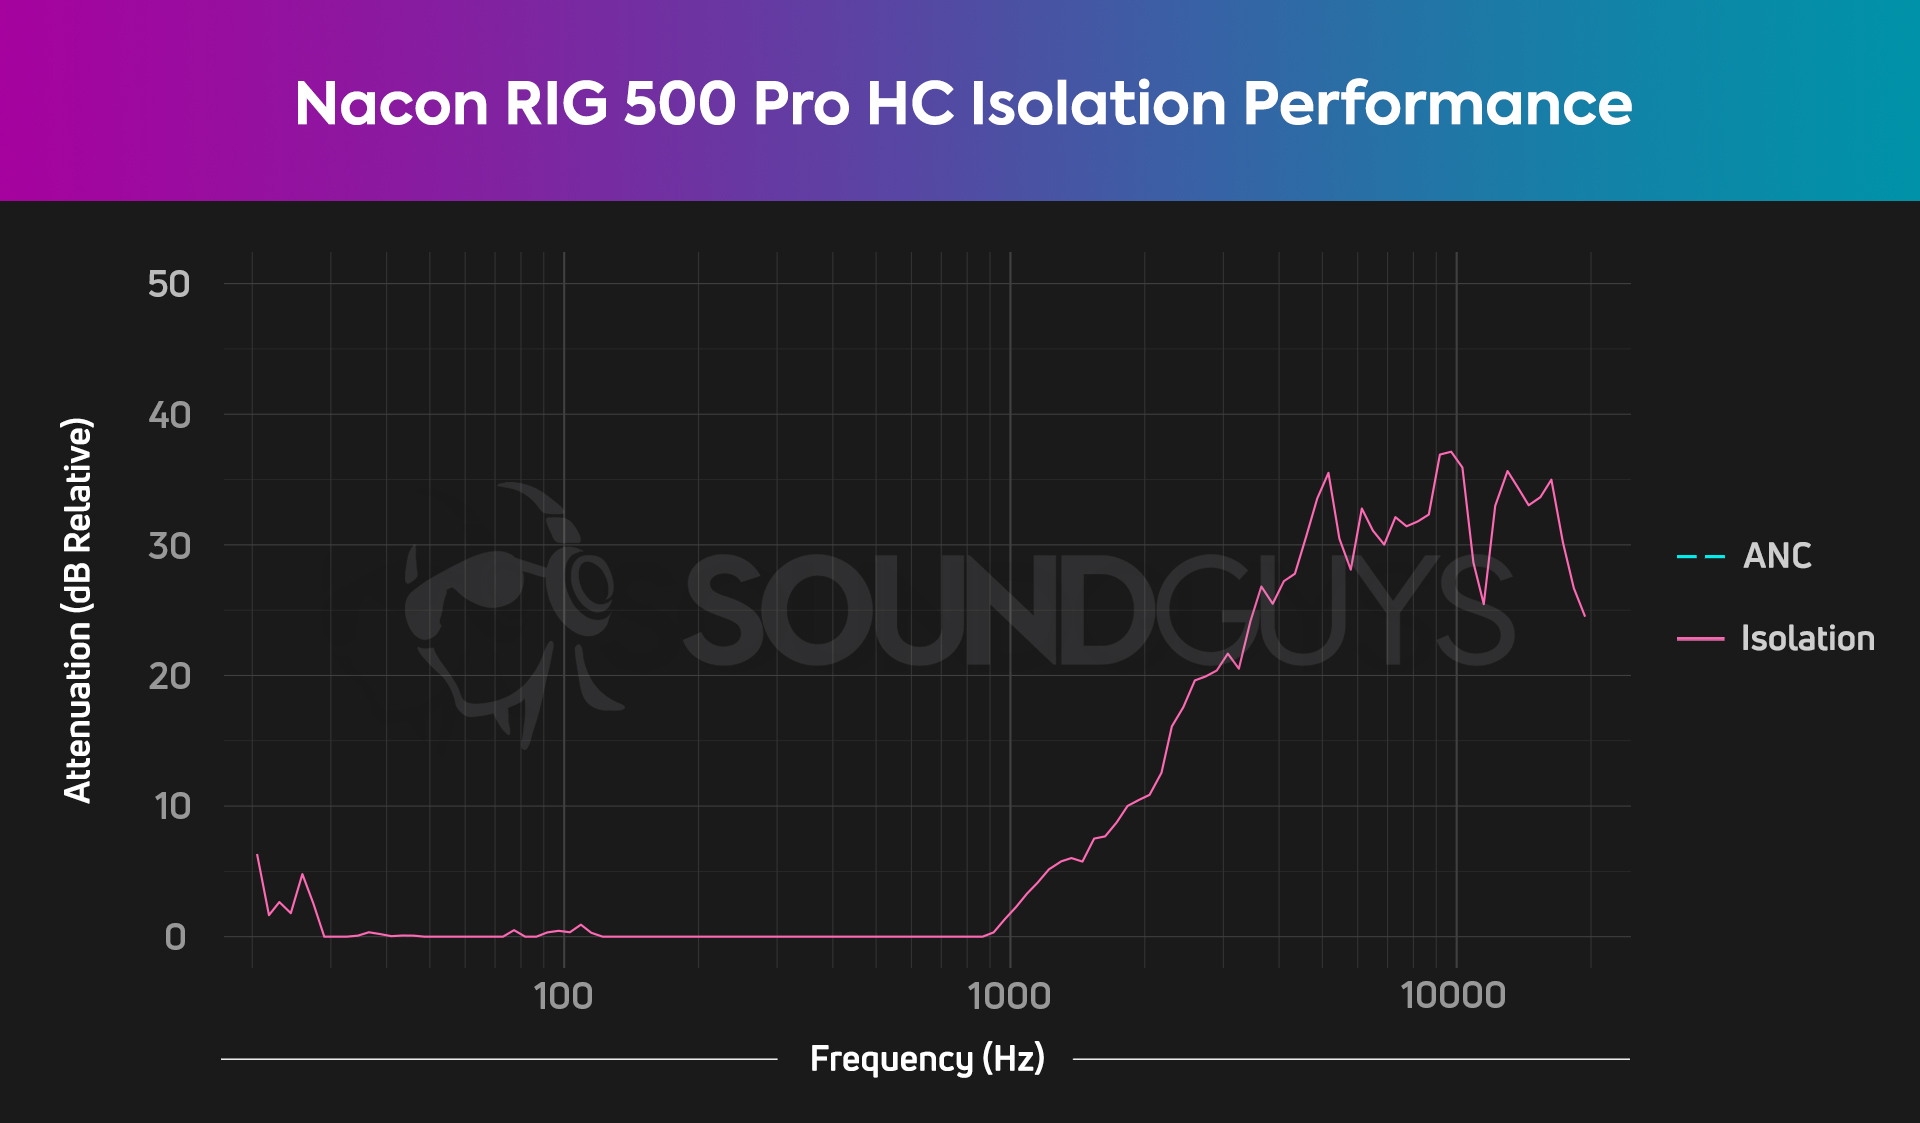 An isolation chart for the Nacon RIG 500 Pro HC gaming headset, which shows pretty average isolation for a gaming headset